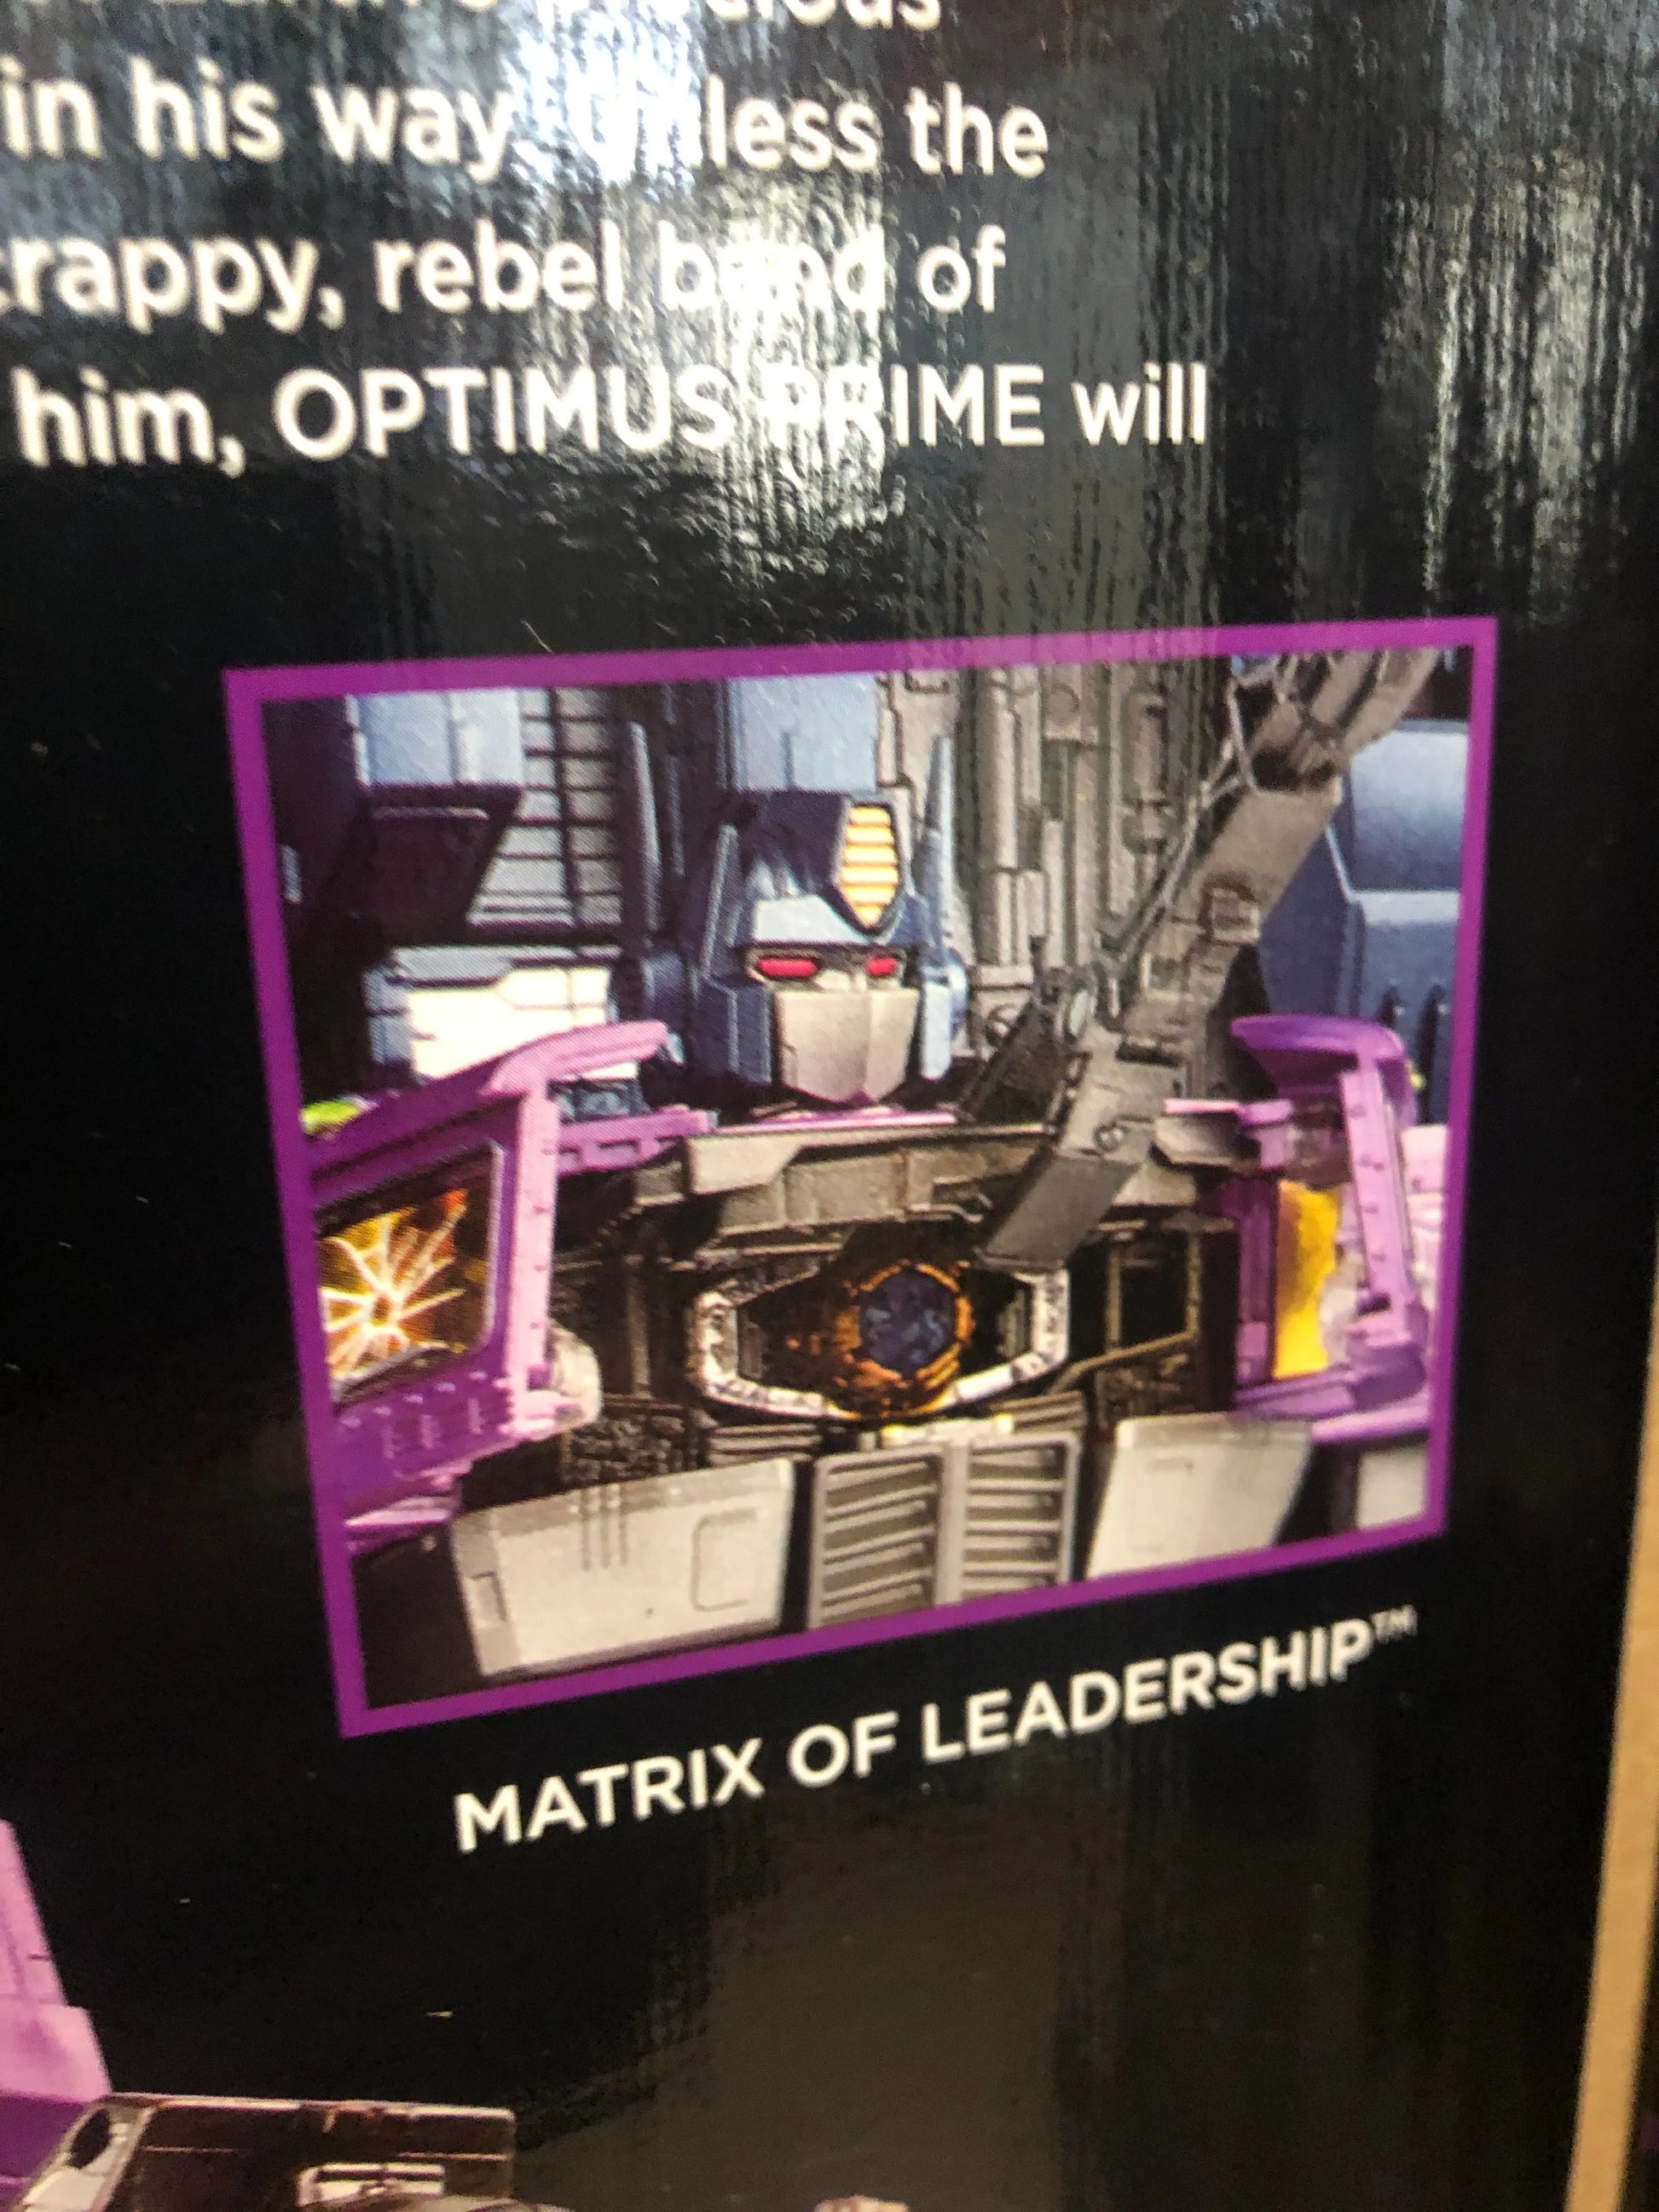 Hasbro Masterpiece: Transformers - Optimus Prime 9" Shattered Glass Action FRENLY BRICKS - Open 7 Days